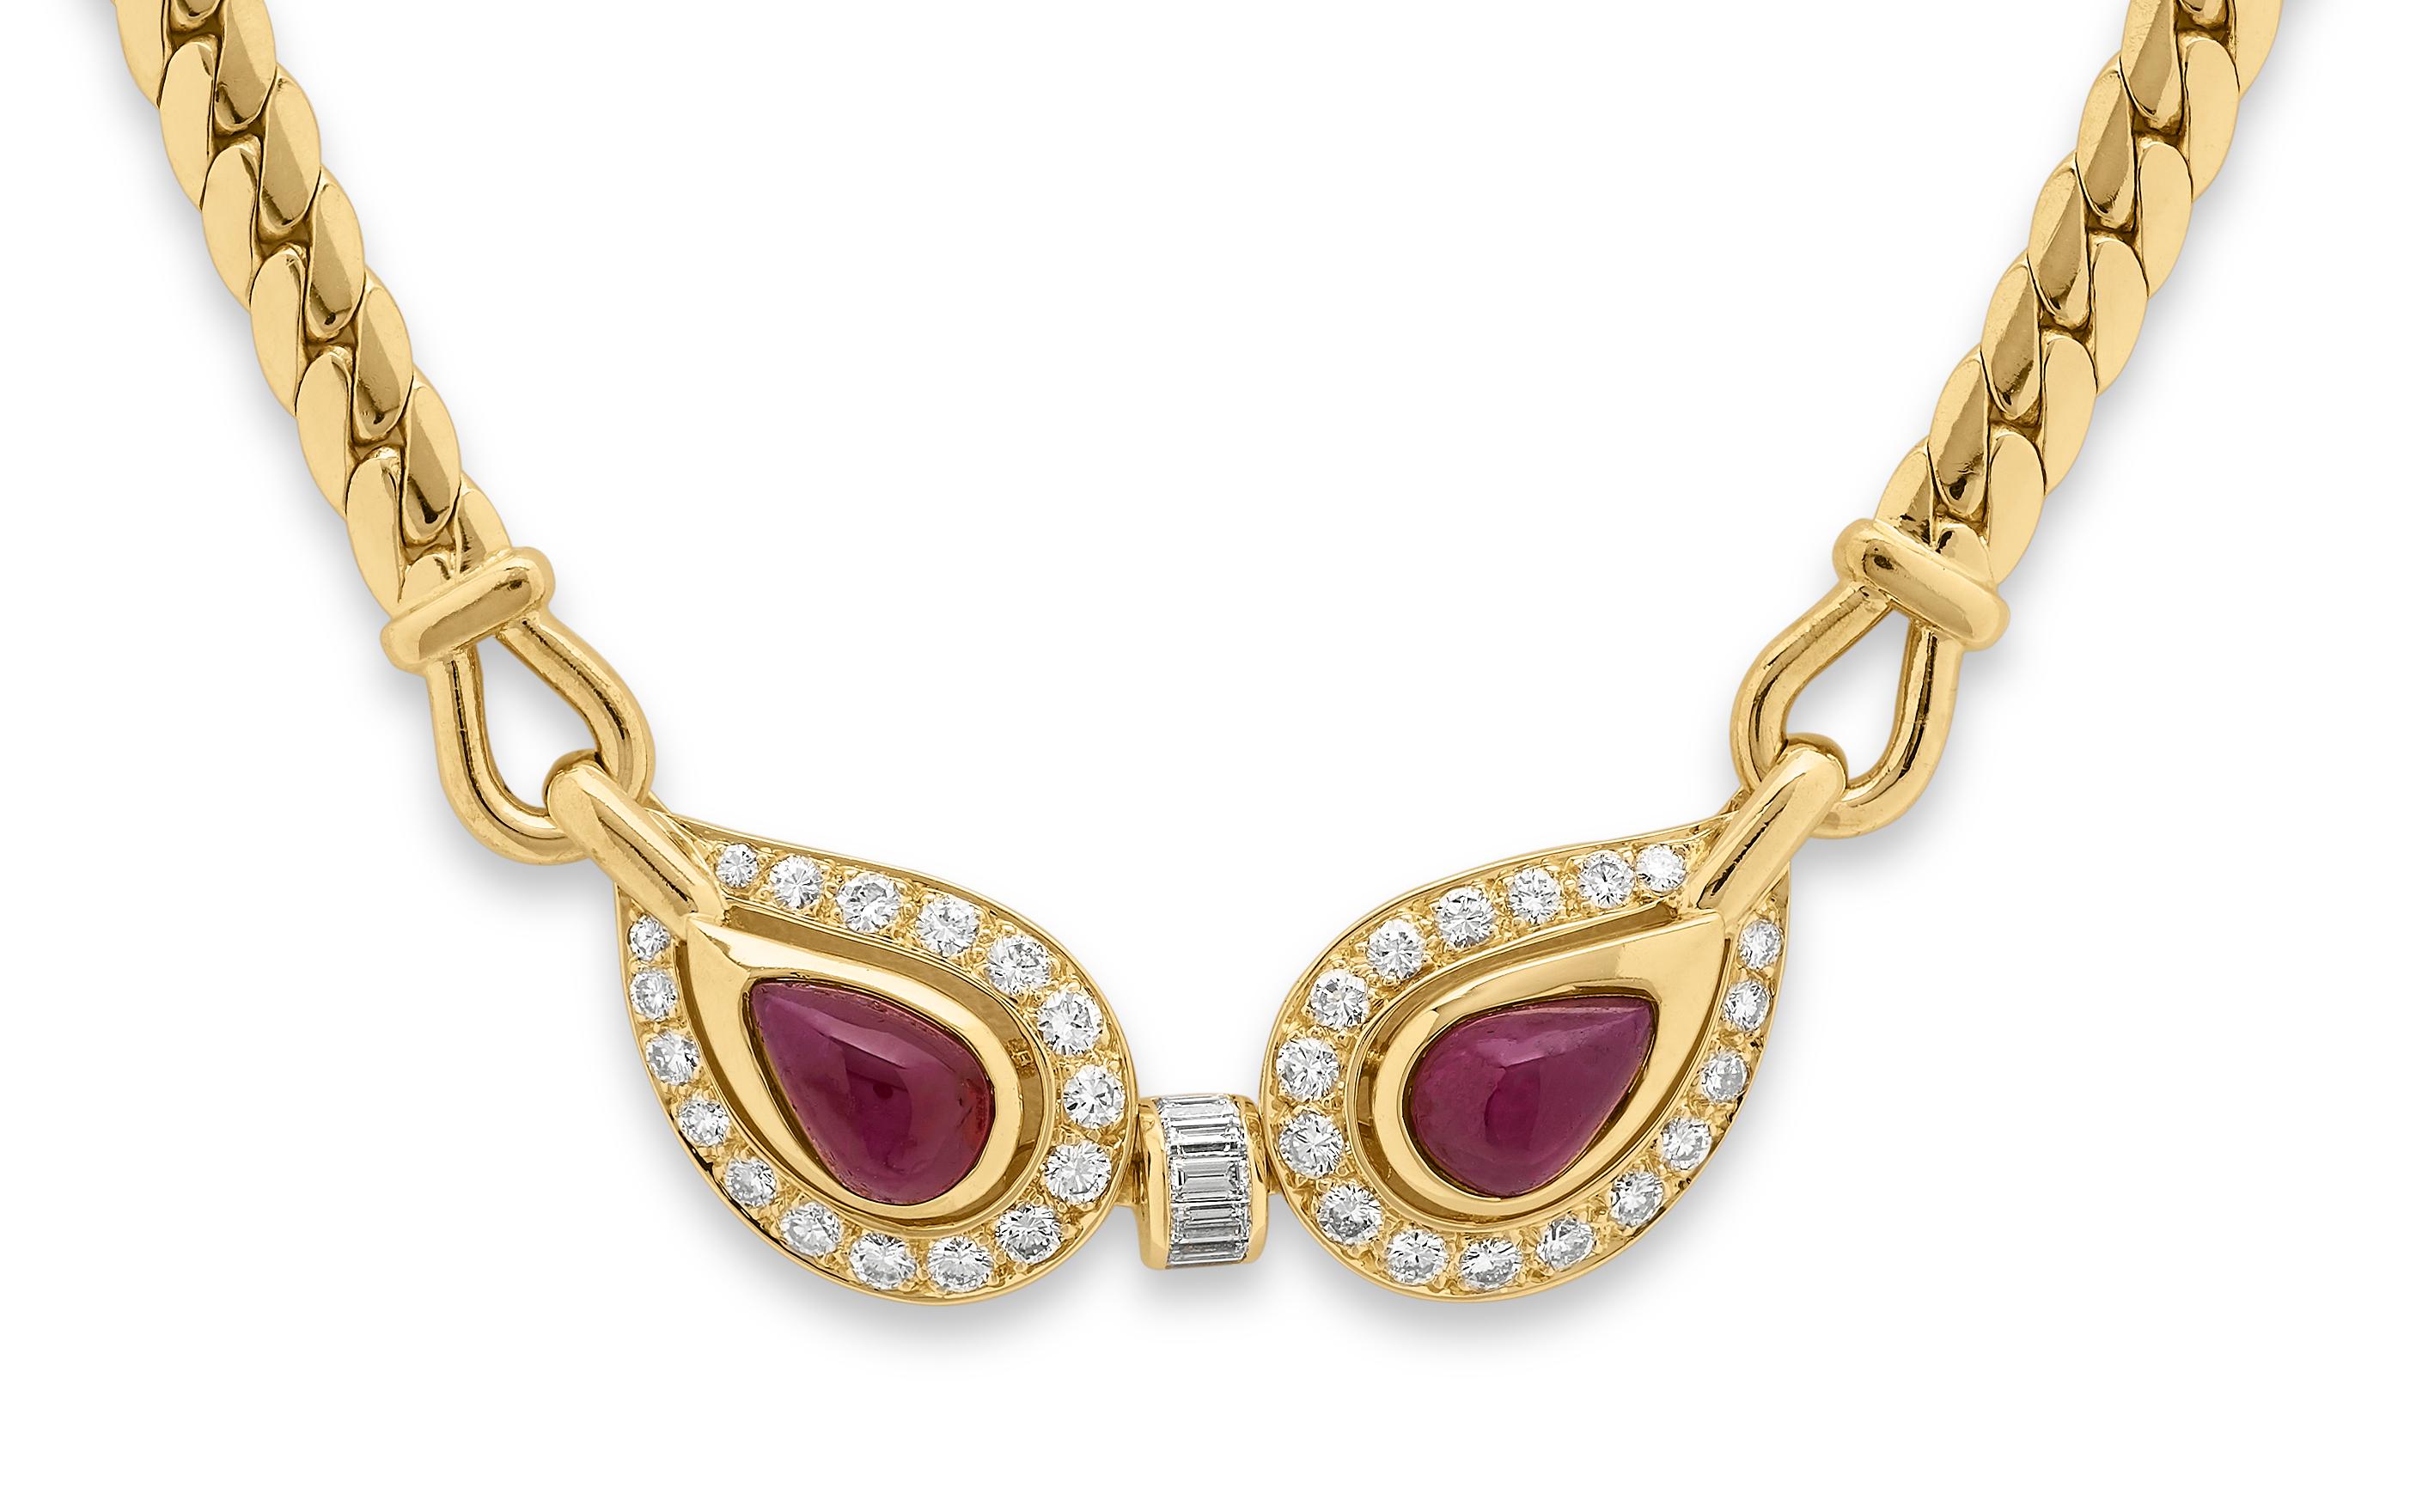 Retro, 1960's ruby and diamond necklace by Cartier, set in 18K yellow gold with original Cartier Pouch. 
2 x pear shape cabochon rubies, approximate total weight 3.0 carats
6 x baguette cut and 32 x round brilliant cut diamonds approximate total